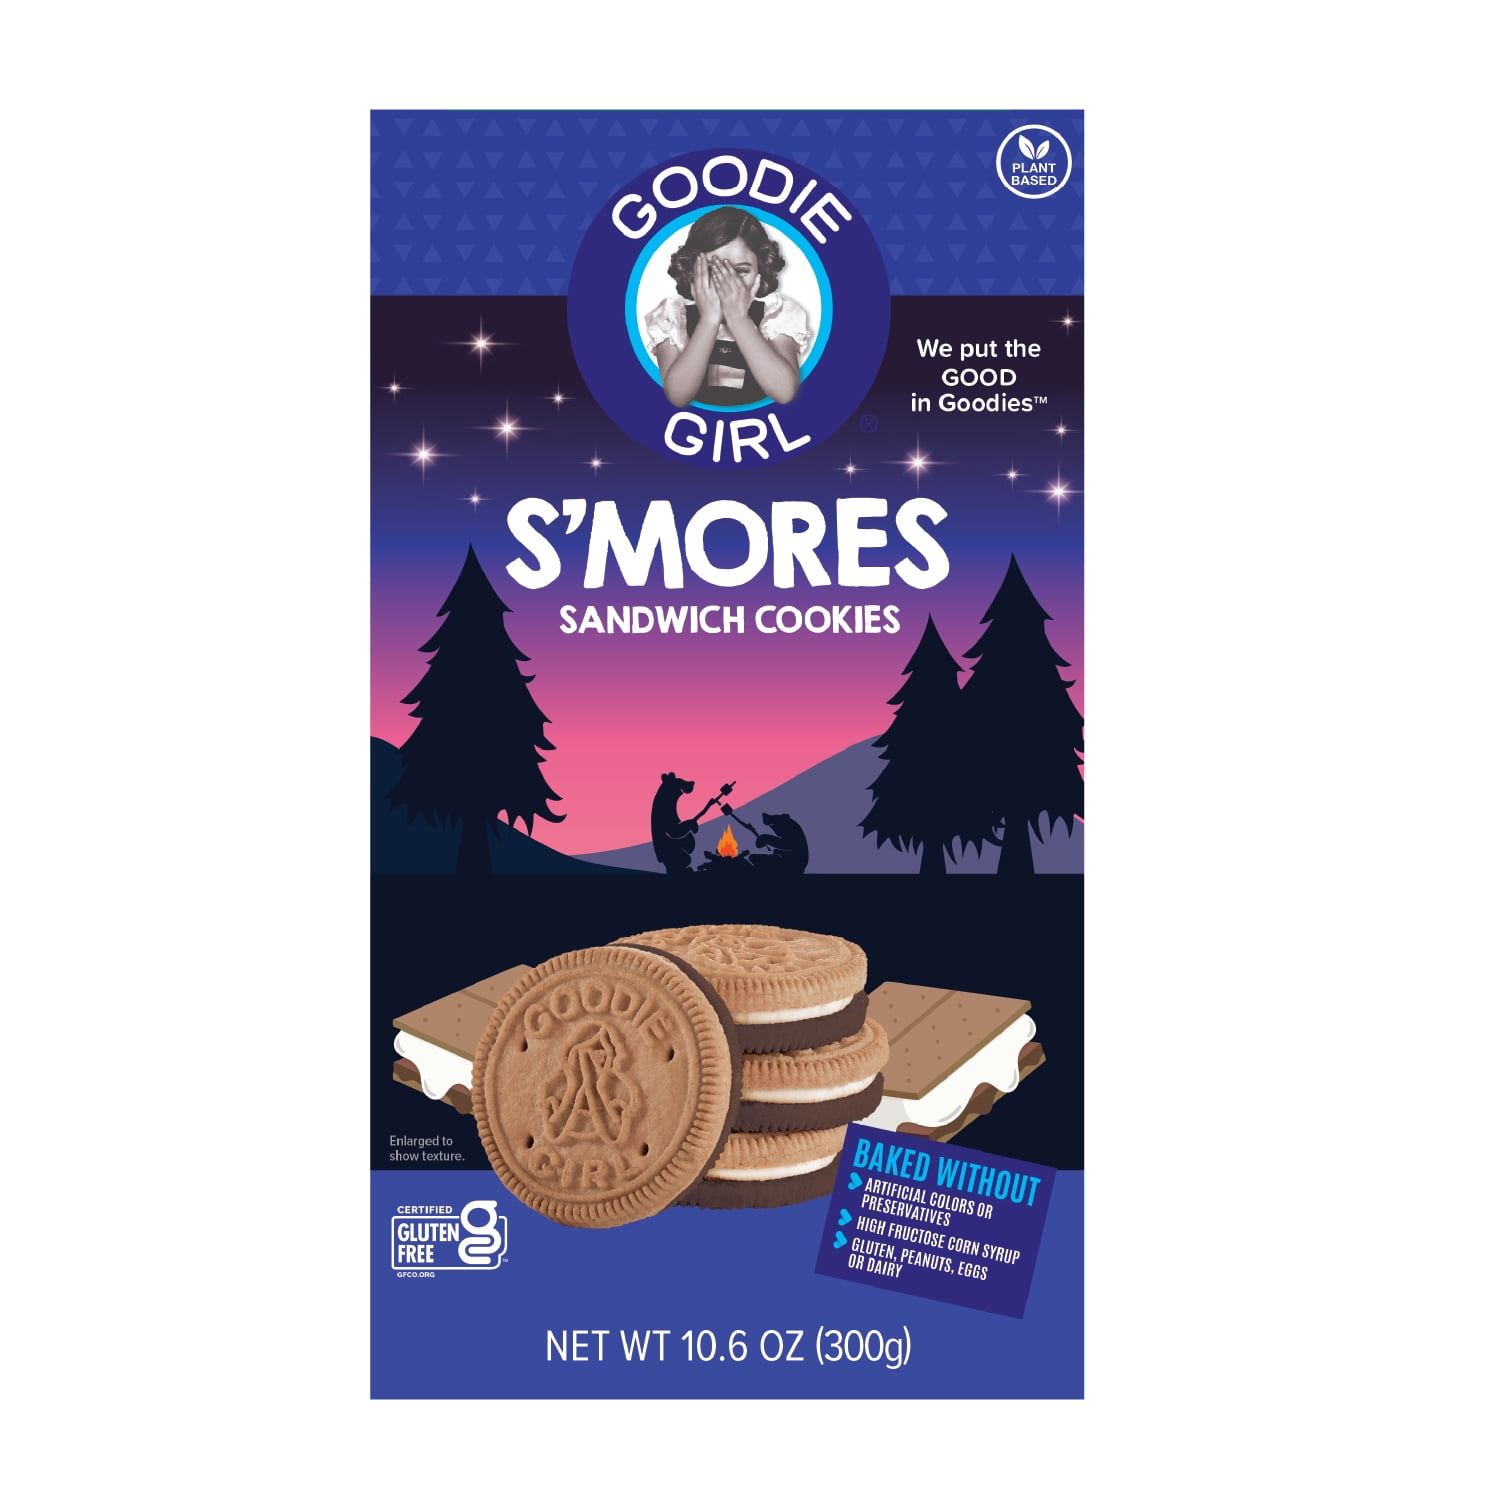 DIY S'mores Kit with Free Printable - Jenny Cookies